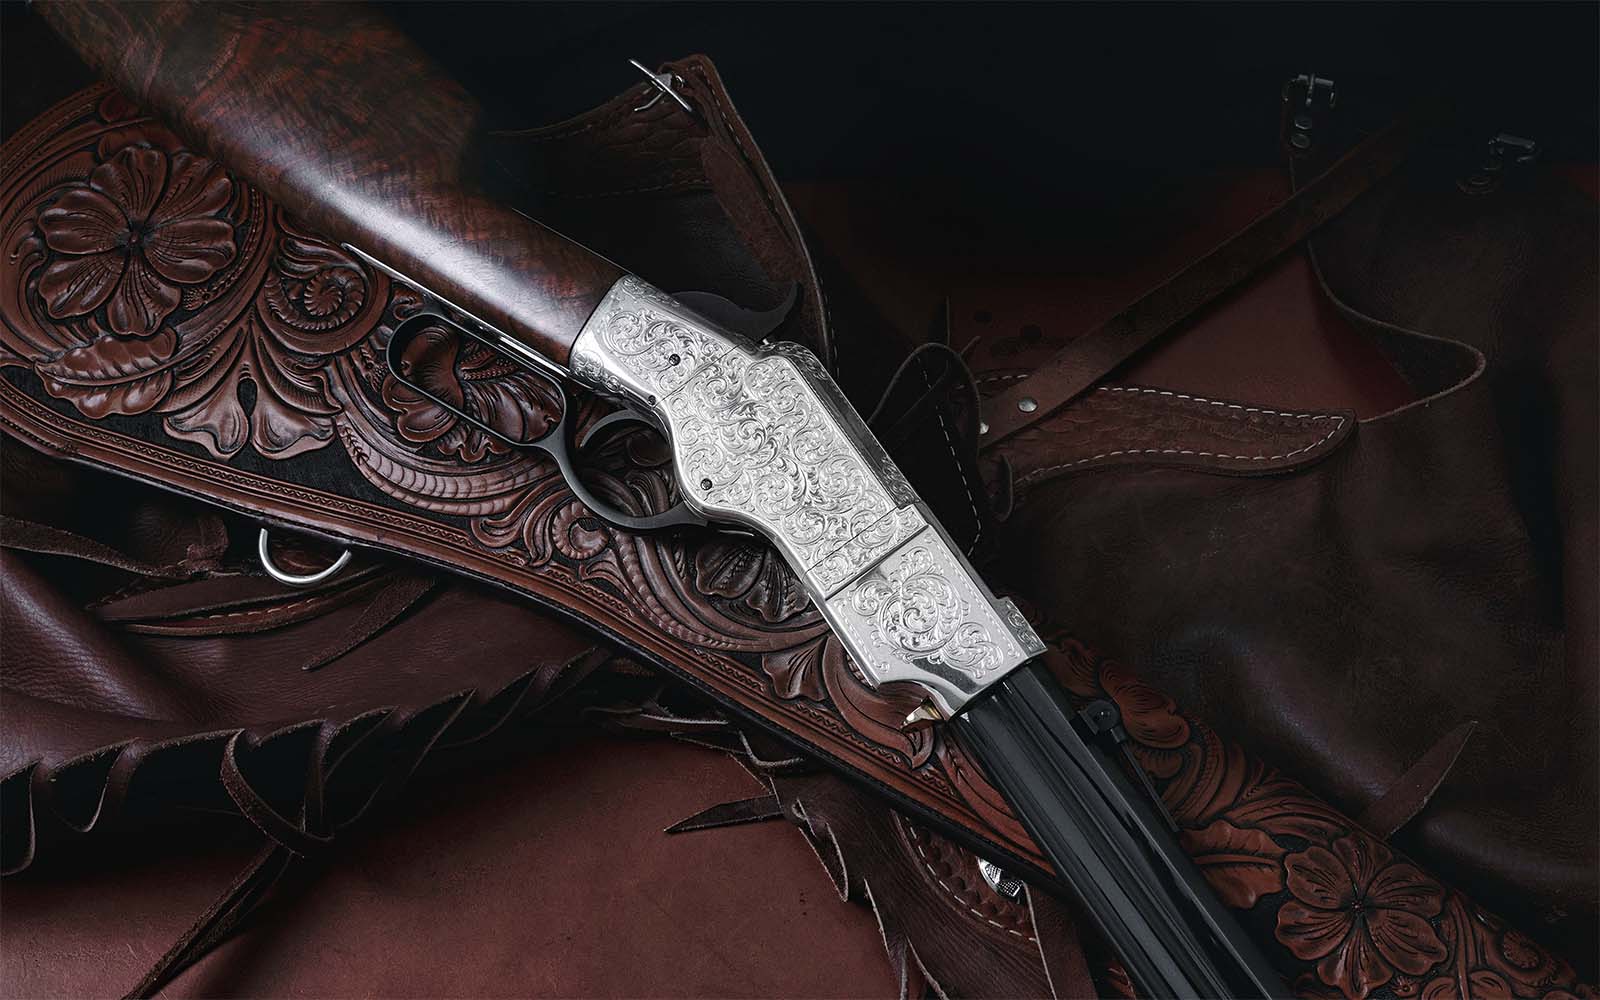 The engraving on the Henry Rifle auction item pays tribute to 19th-century engraver Louis Daniel Nimschke.